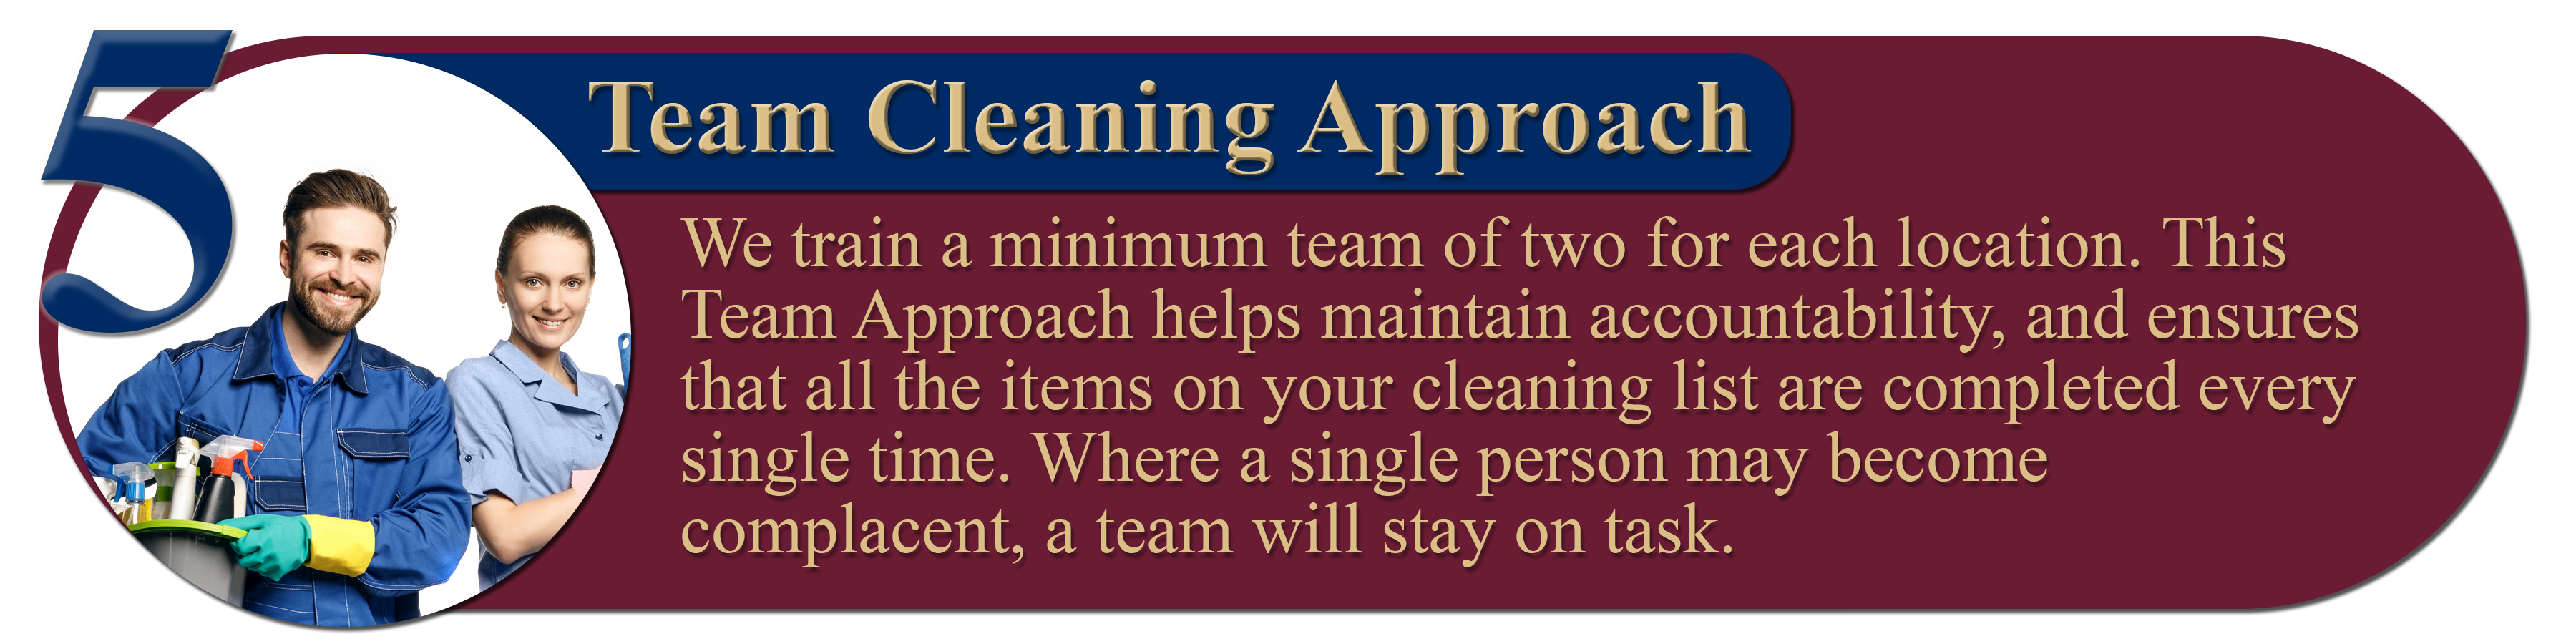 5. Team Cleaning Approach: We train a minimum team of two for each location. This Team Approach helps maintain accountability, and ensures that all the items on your cleaning list are completed every single time. Where a single person may become complacent, a team will stay on task.